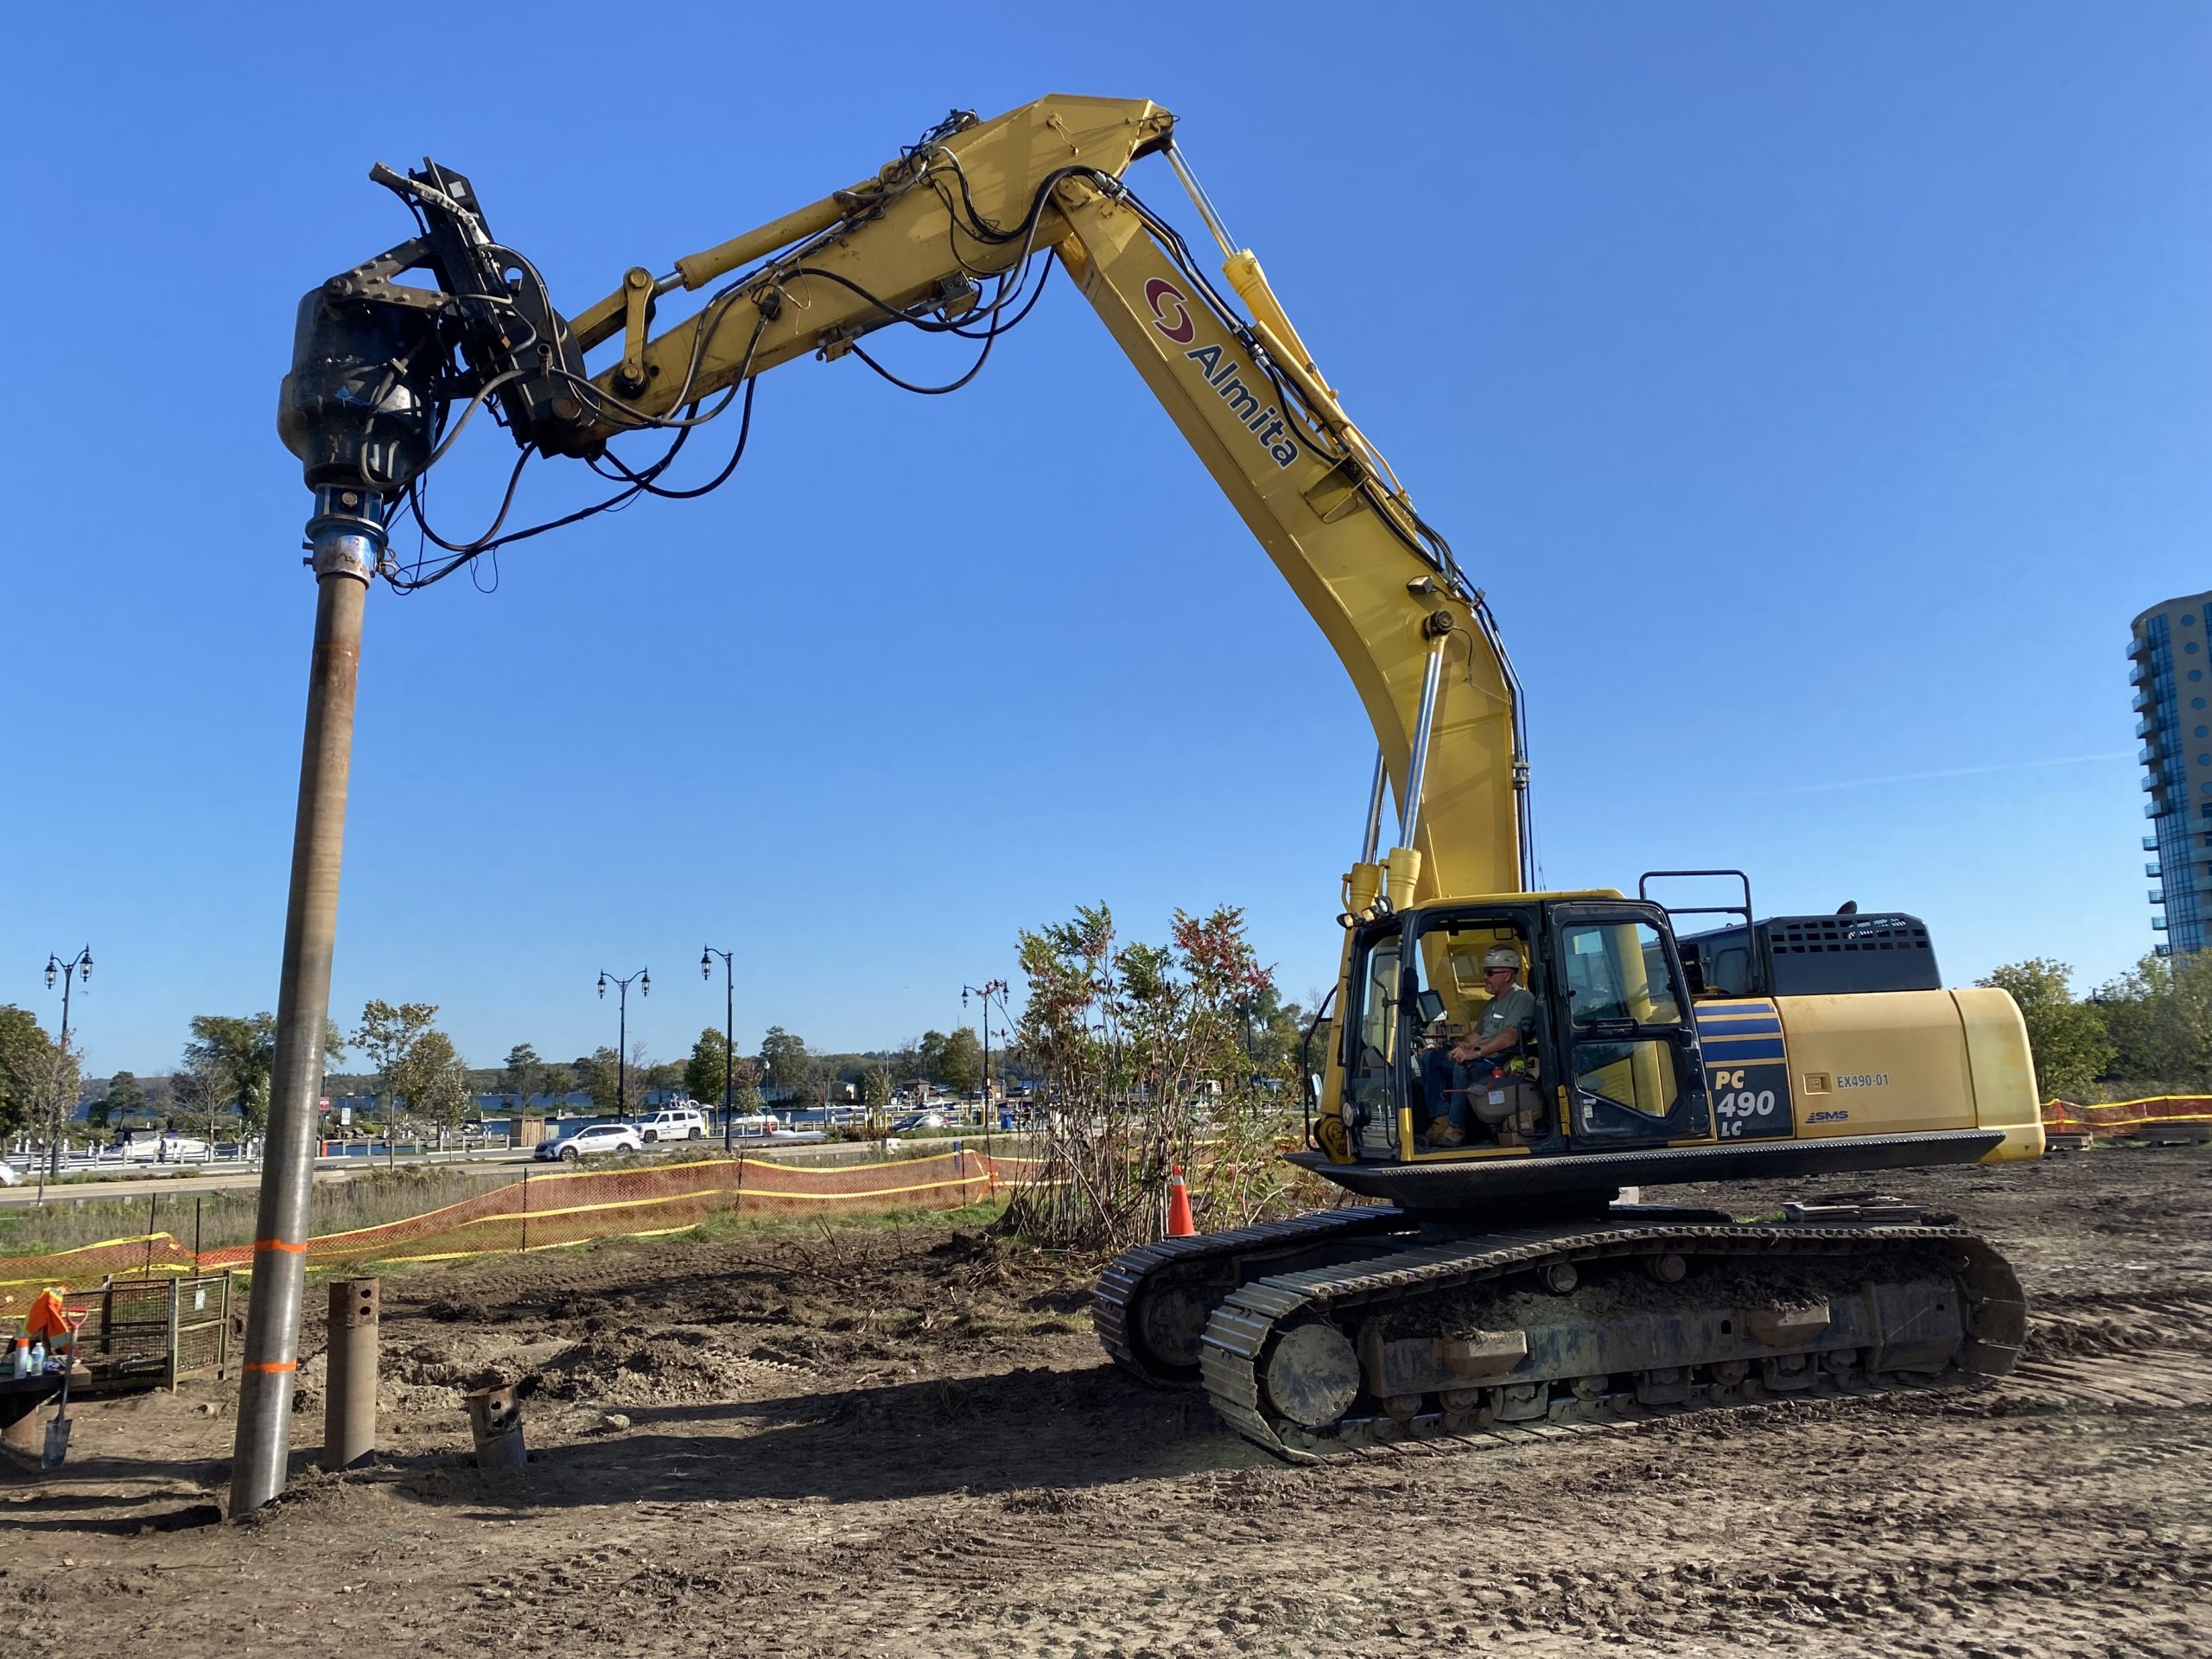 Local 793 member Mark Abrams operating a Komatsu PC 490 excavator with a drill head.